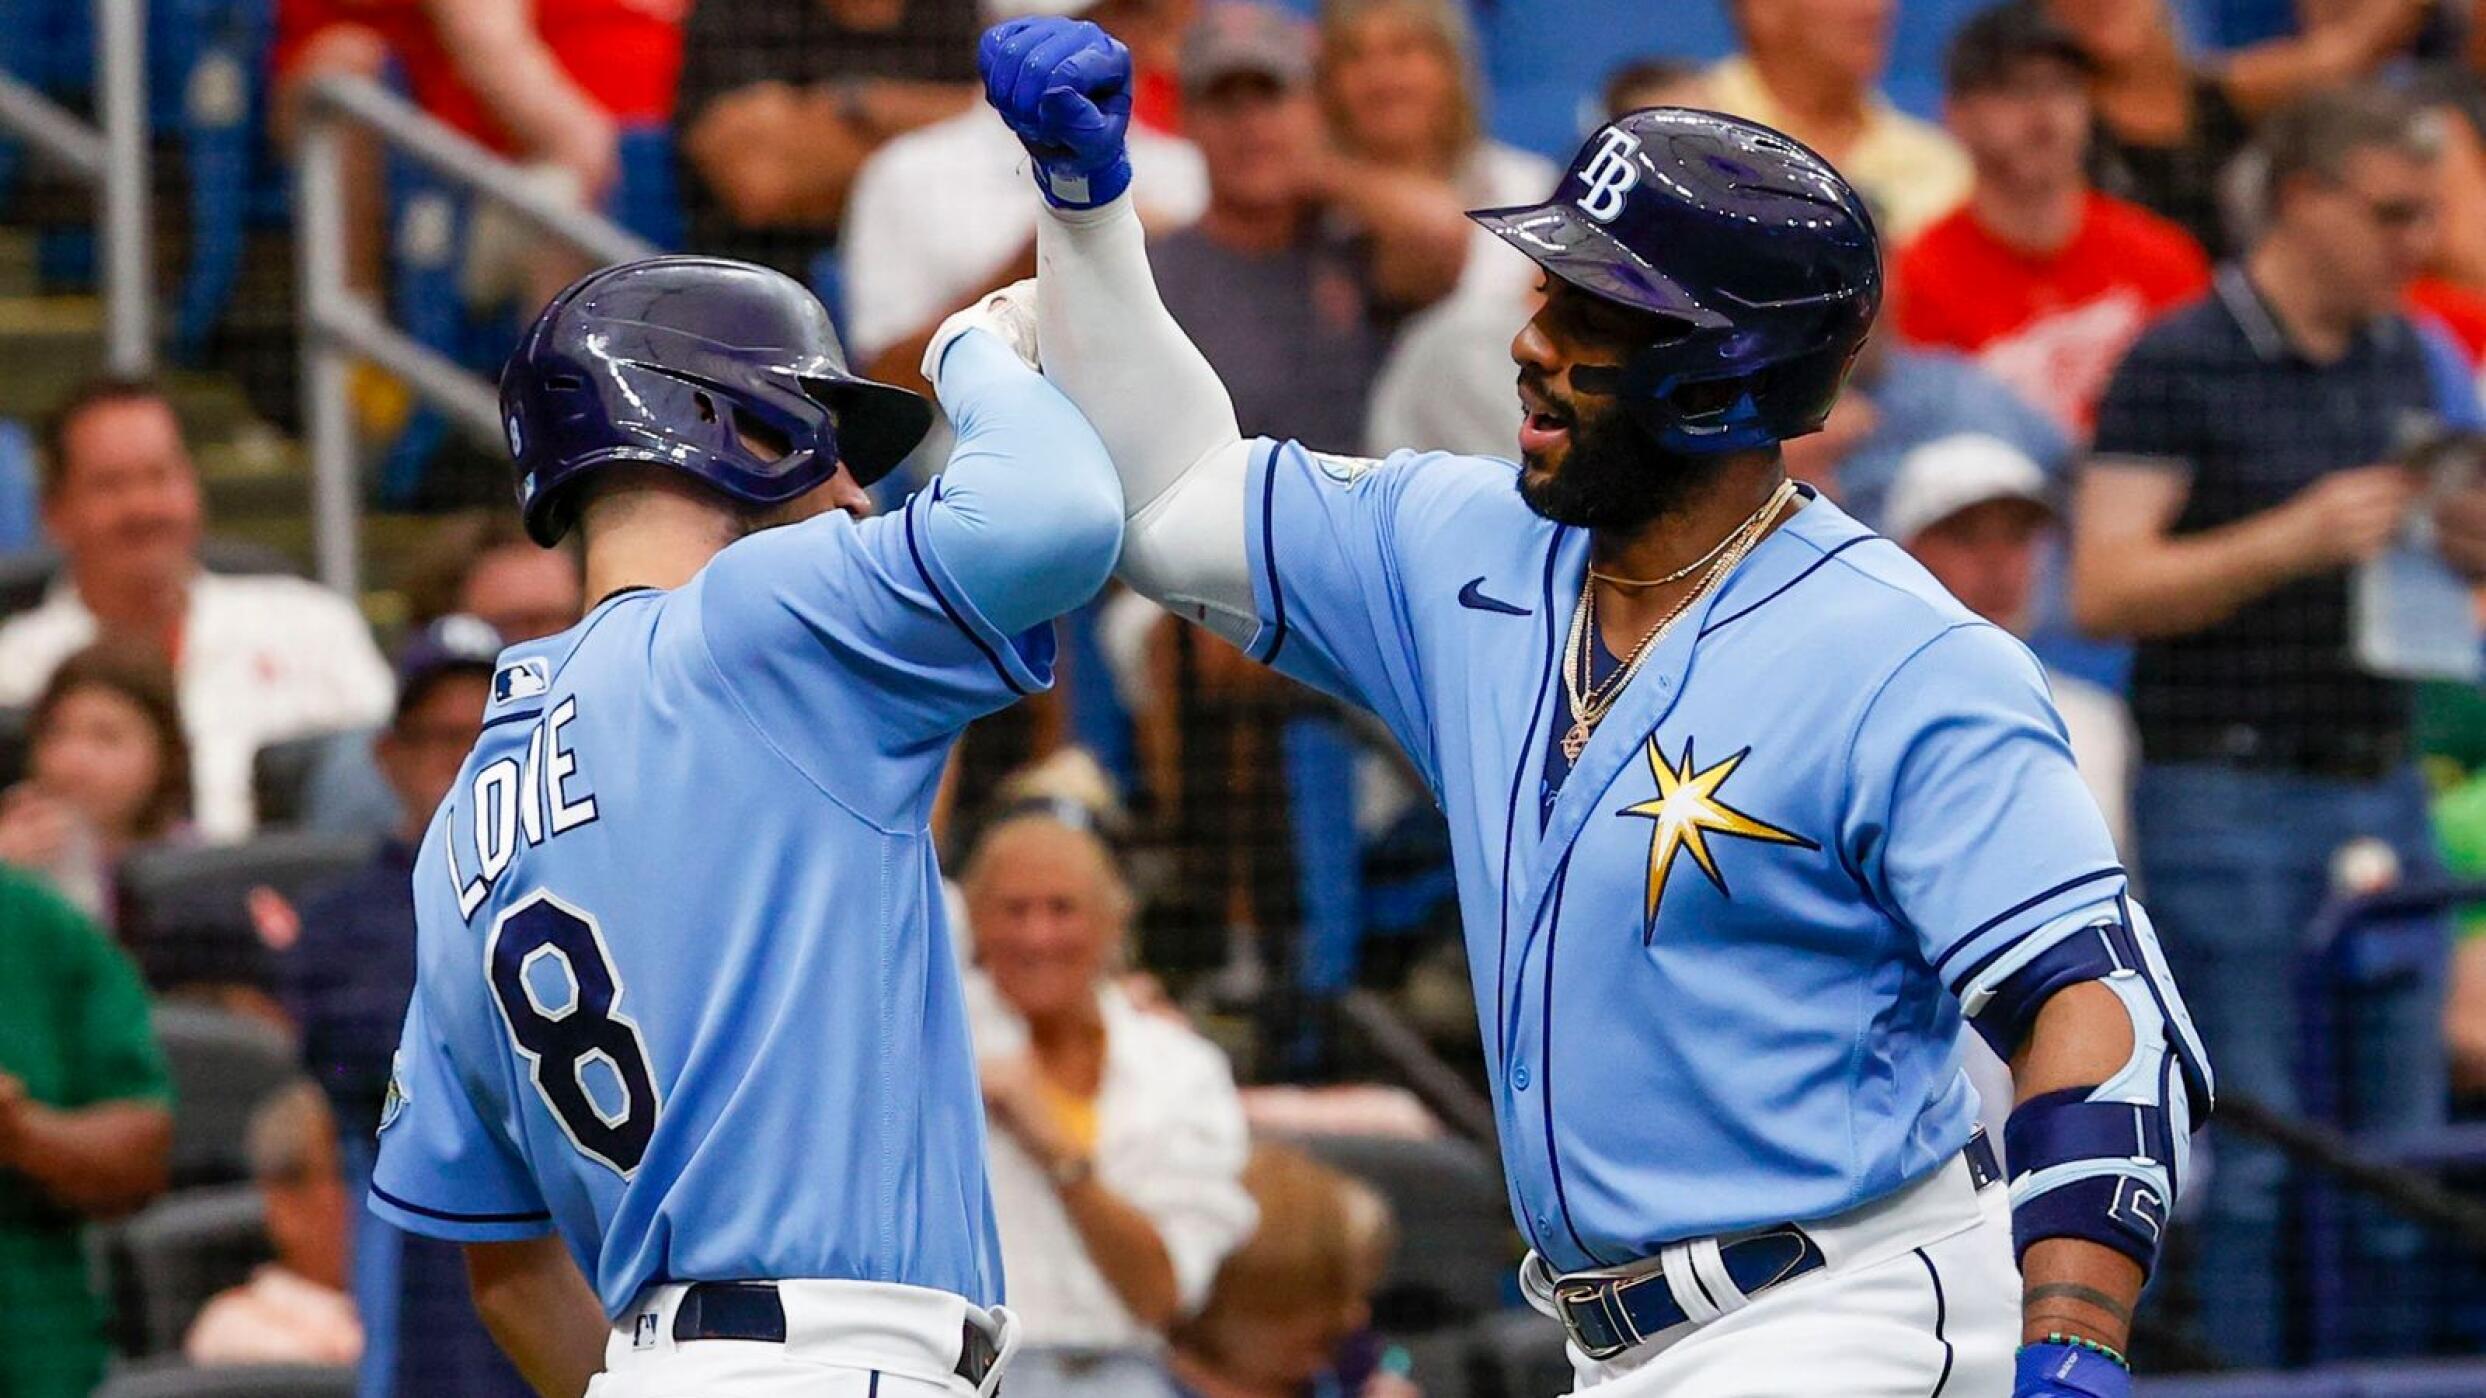 Tampa Bay Rays roster heavy with right-handed hitters